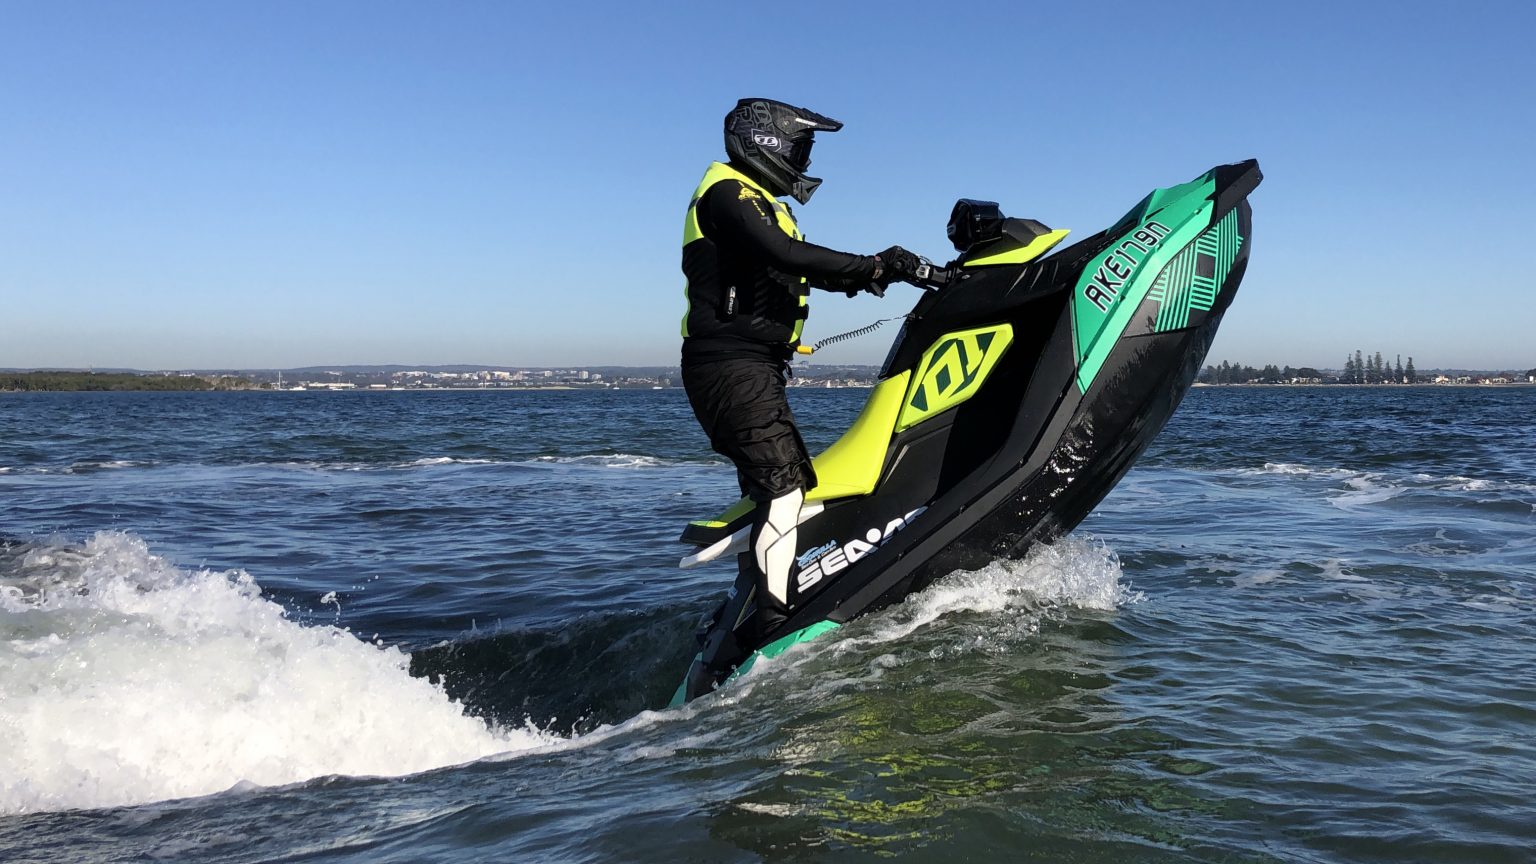 2020 SeaDoo Spark Trixx Review, price and specs